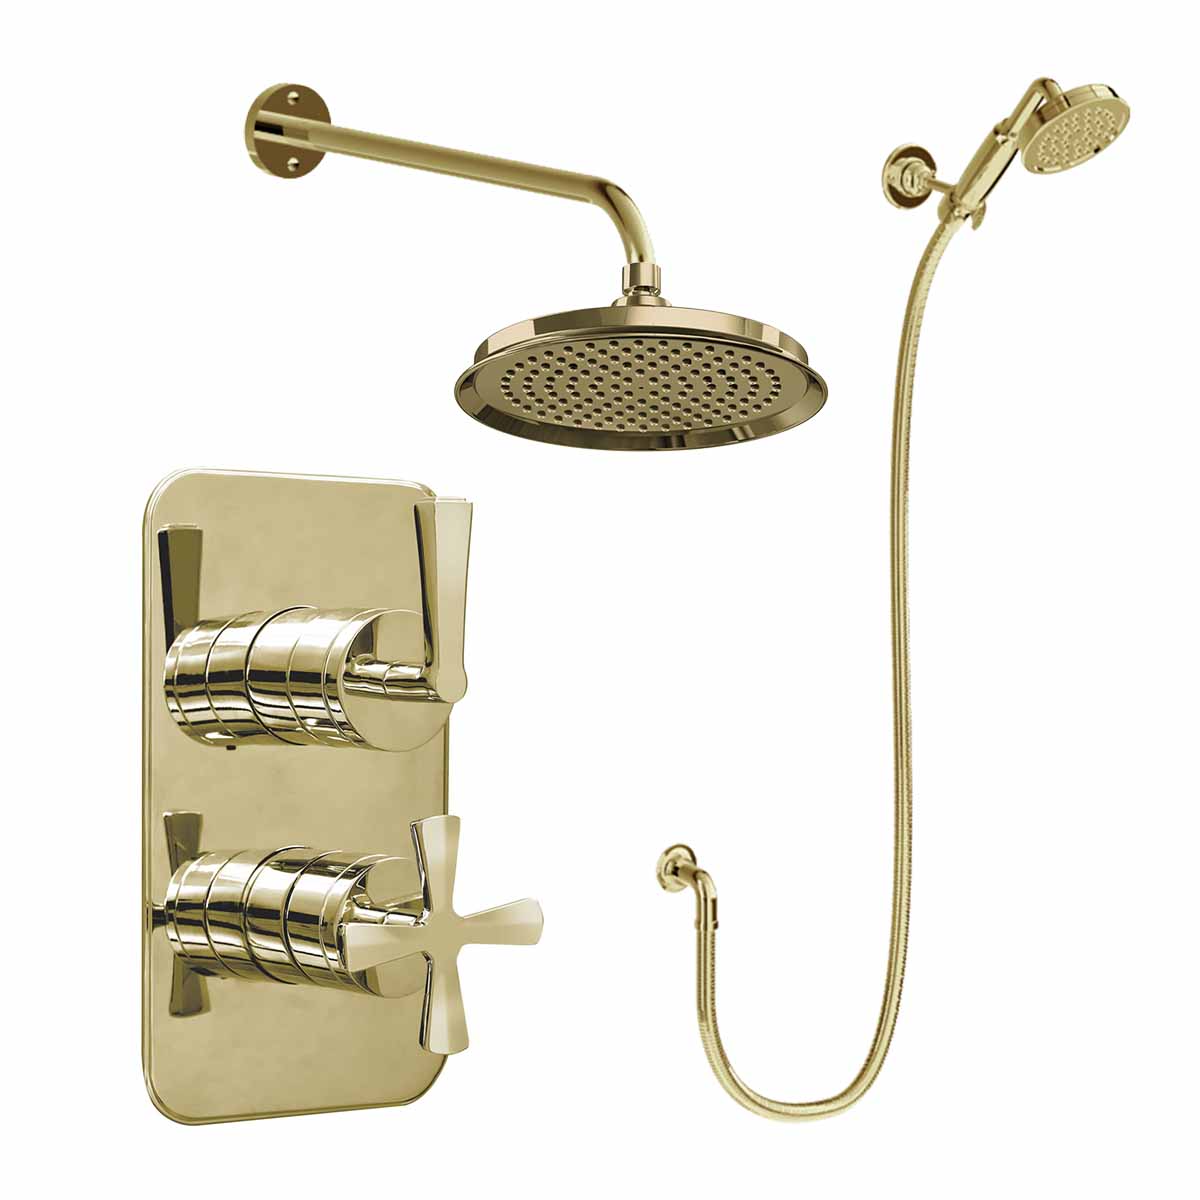 Burlington Riviera Shower Valve With Wall Mounted Fixed Overhead and Handset Gold Deluxe Bathrooms UK